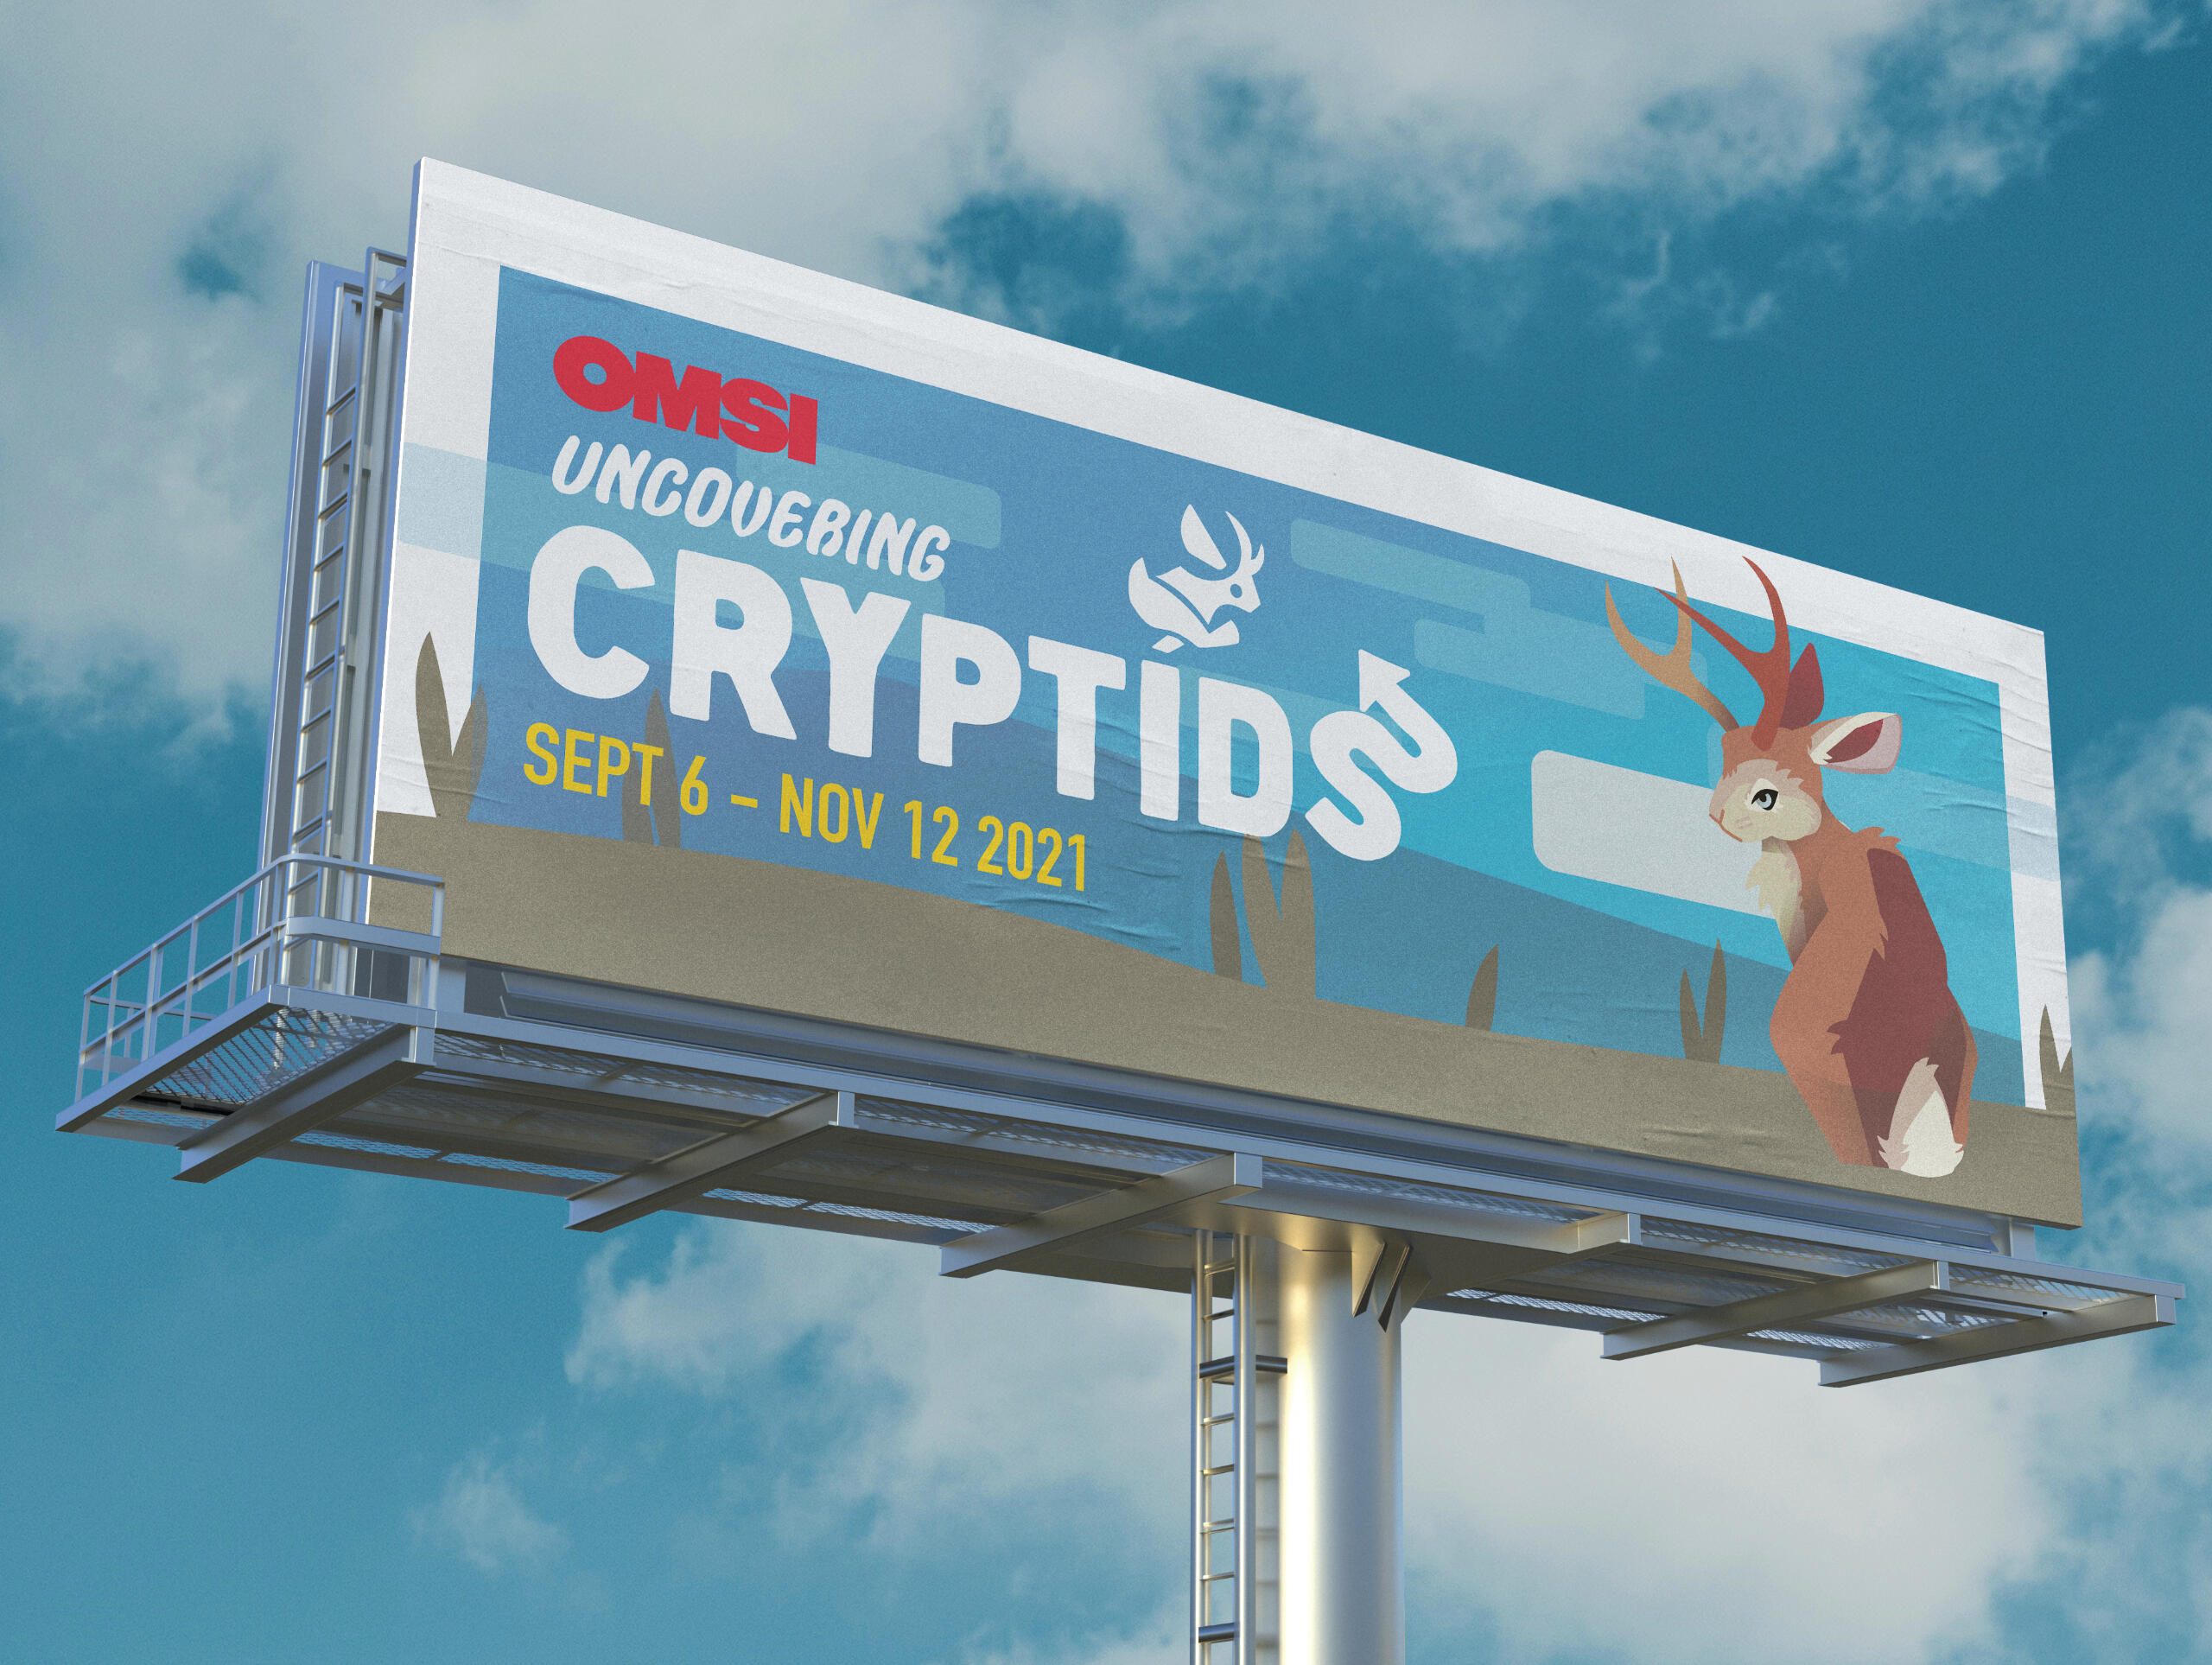 A billboard mockup for the OMSI: Uncovering Cryptids exhibit